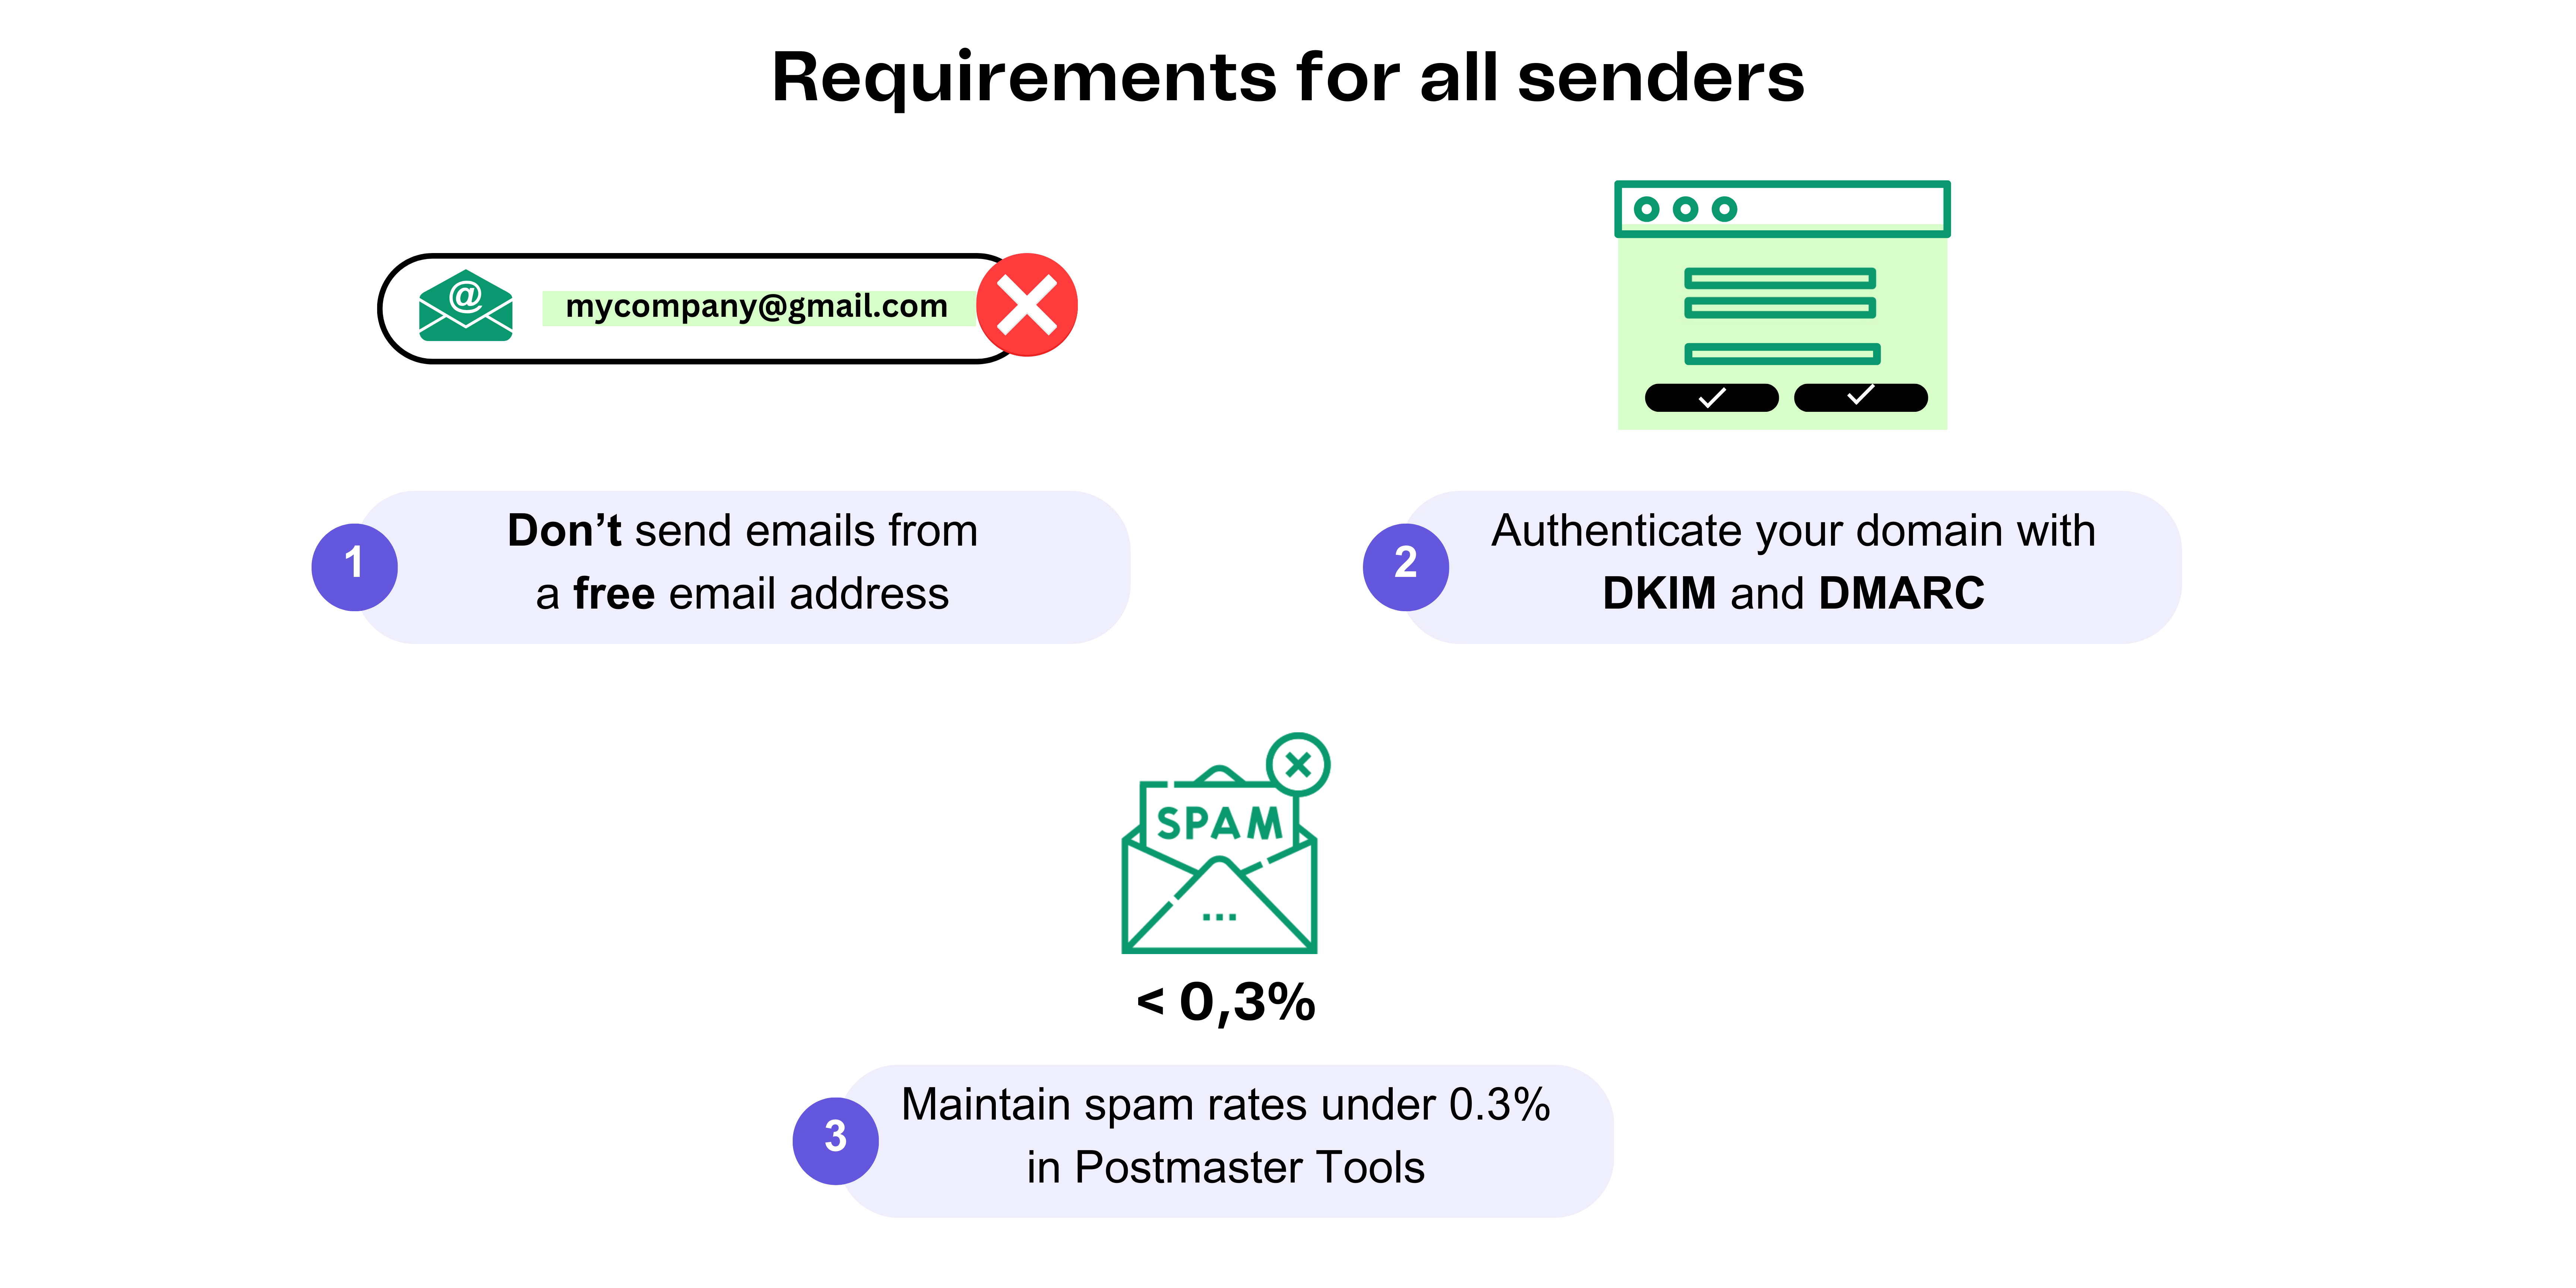 Yahoo Gmail requirements (6).png